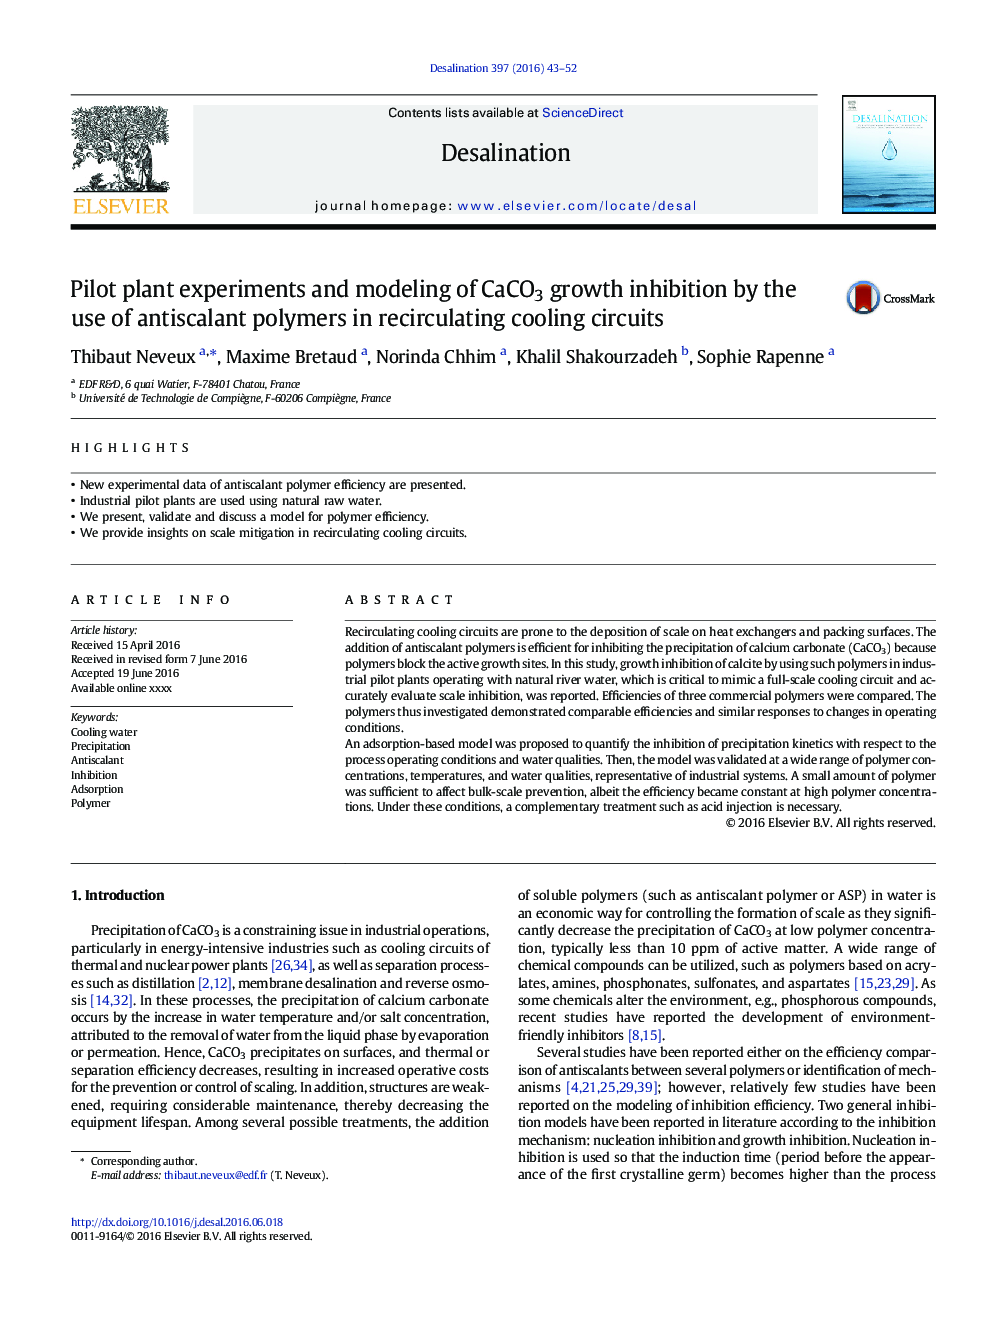 Pilot plant experiments and modeling of CaCO3 growth inhibition by the use of antiscalant polymers in recirculating cooling circuits